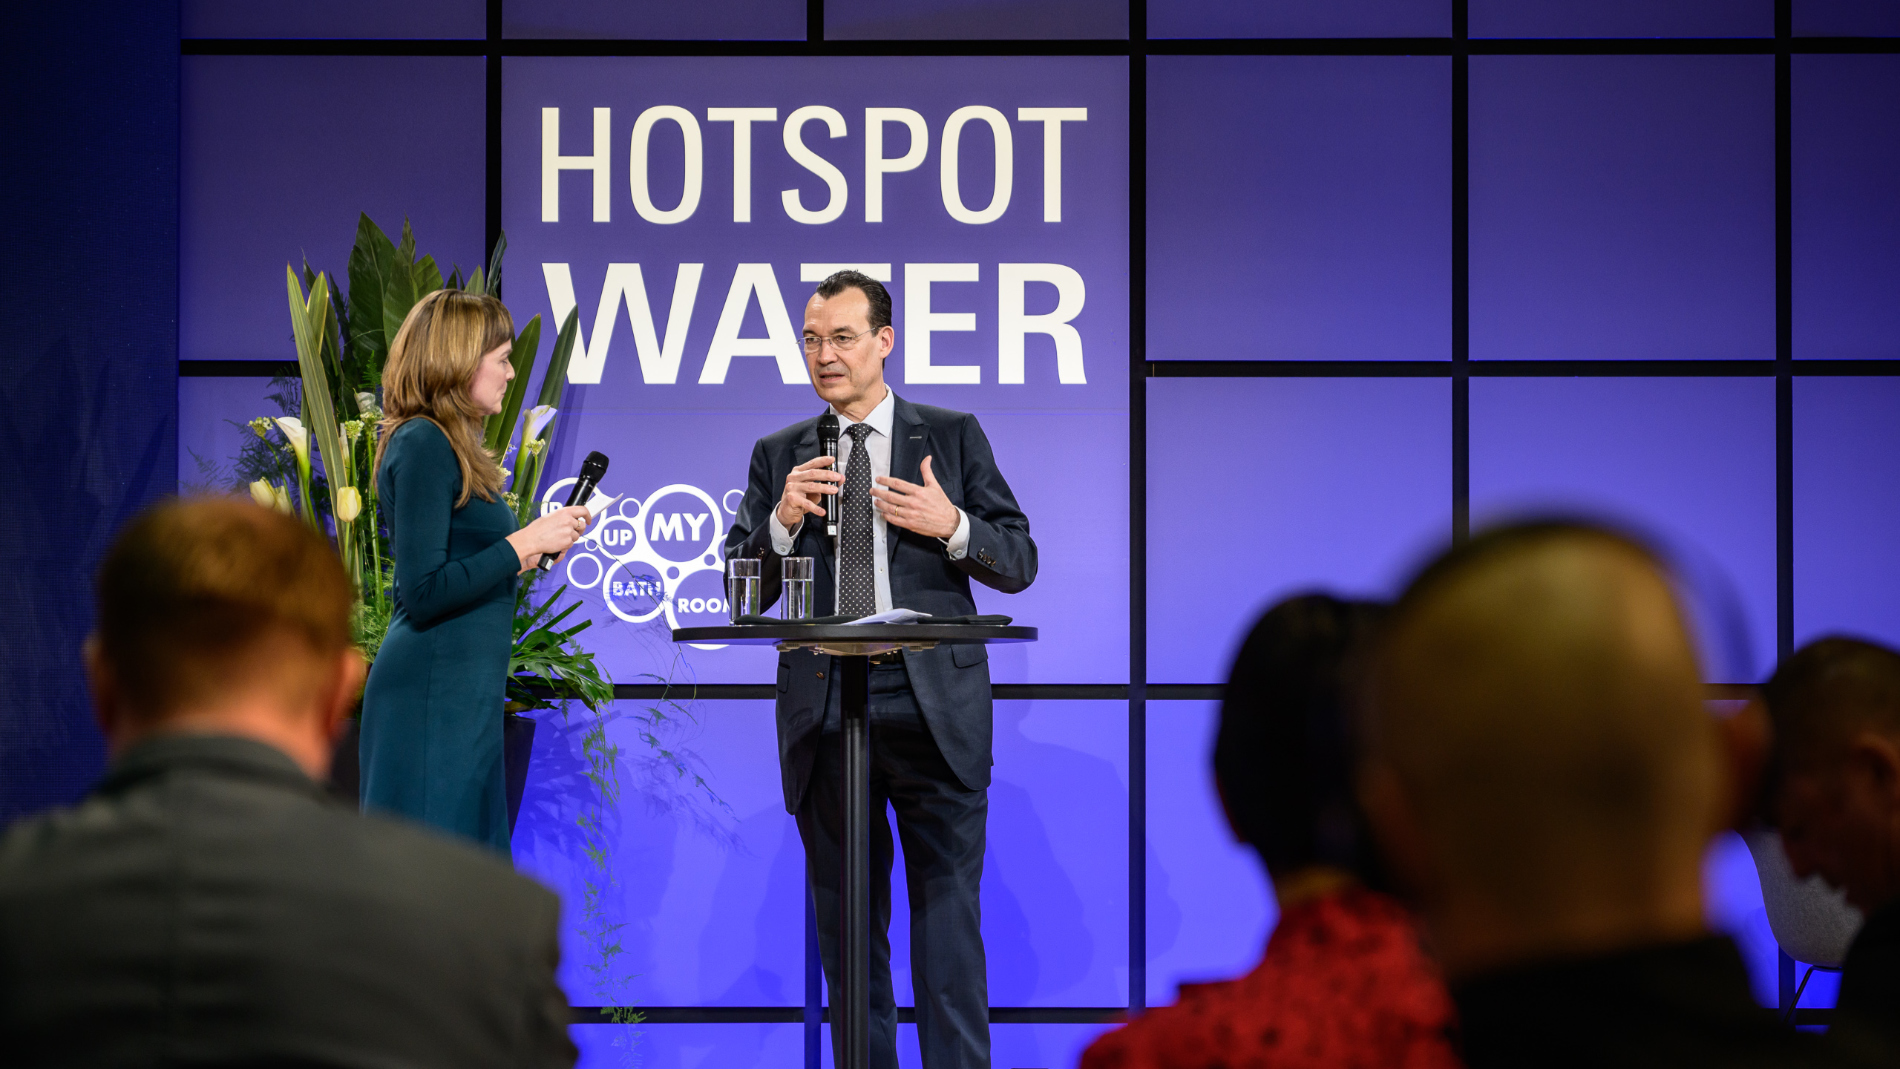 Lecture at Hotspot Water